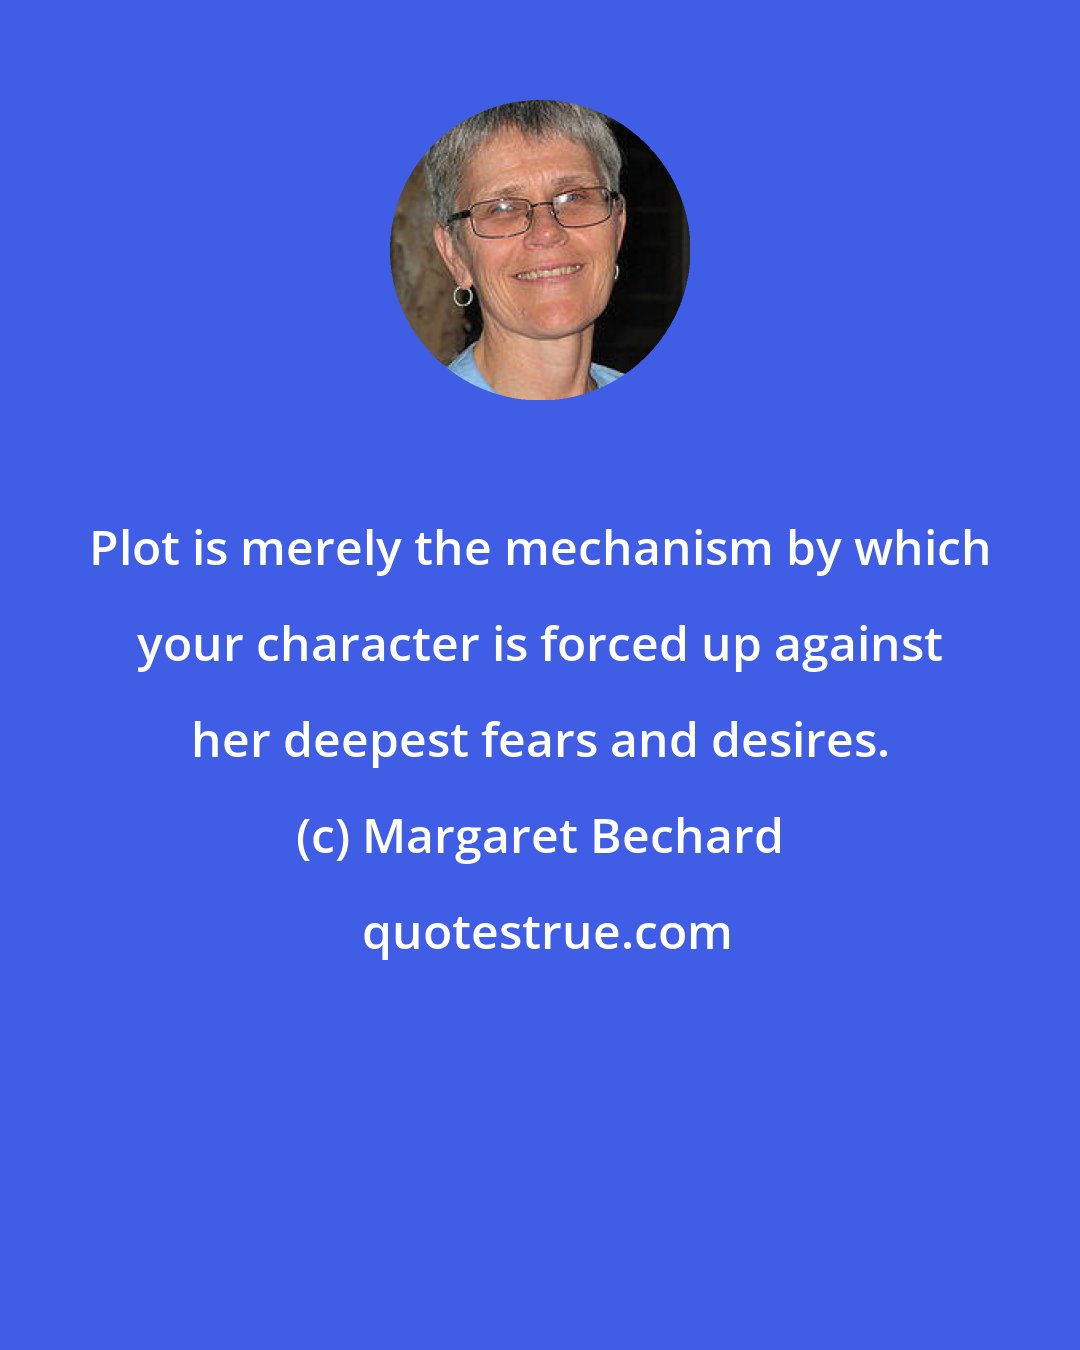 Margaret Bechard: Plot is merely the mechanism by which your character is forced up against her deepest fears and desires.